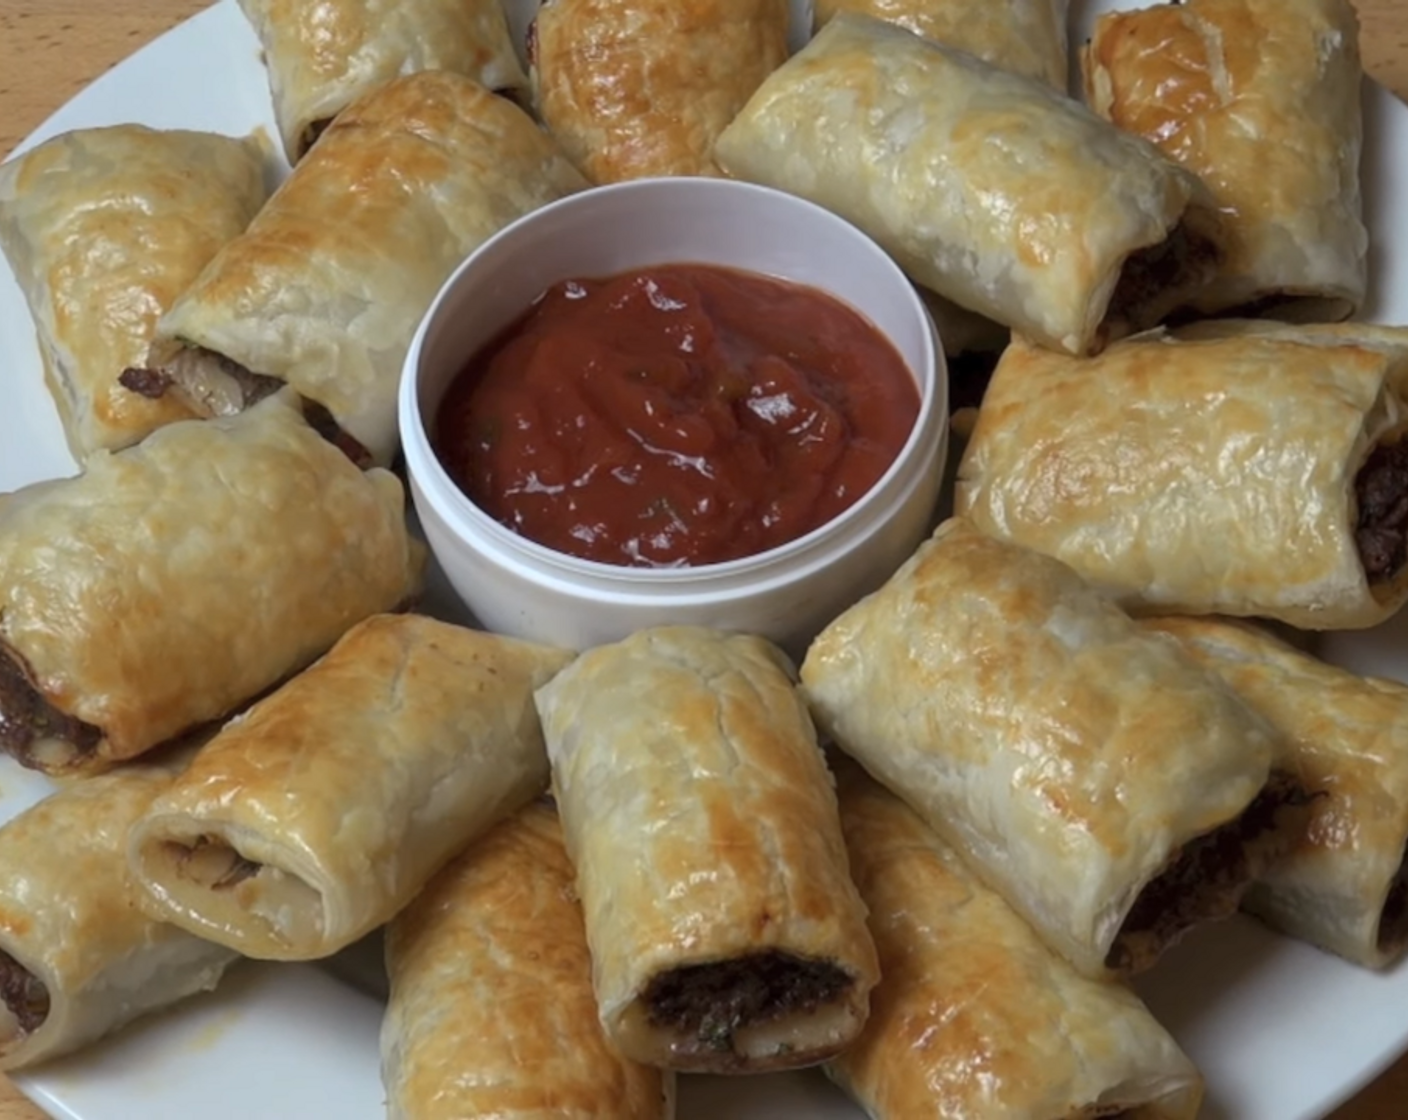 Mexican Style Sausage Rolls